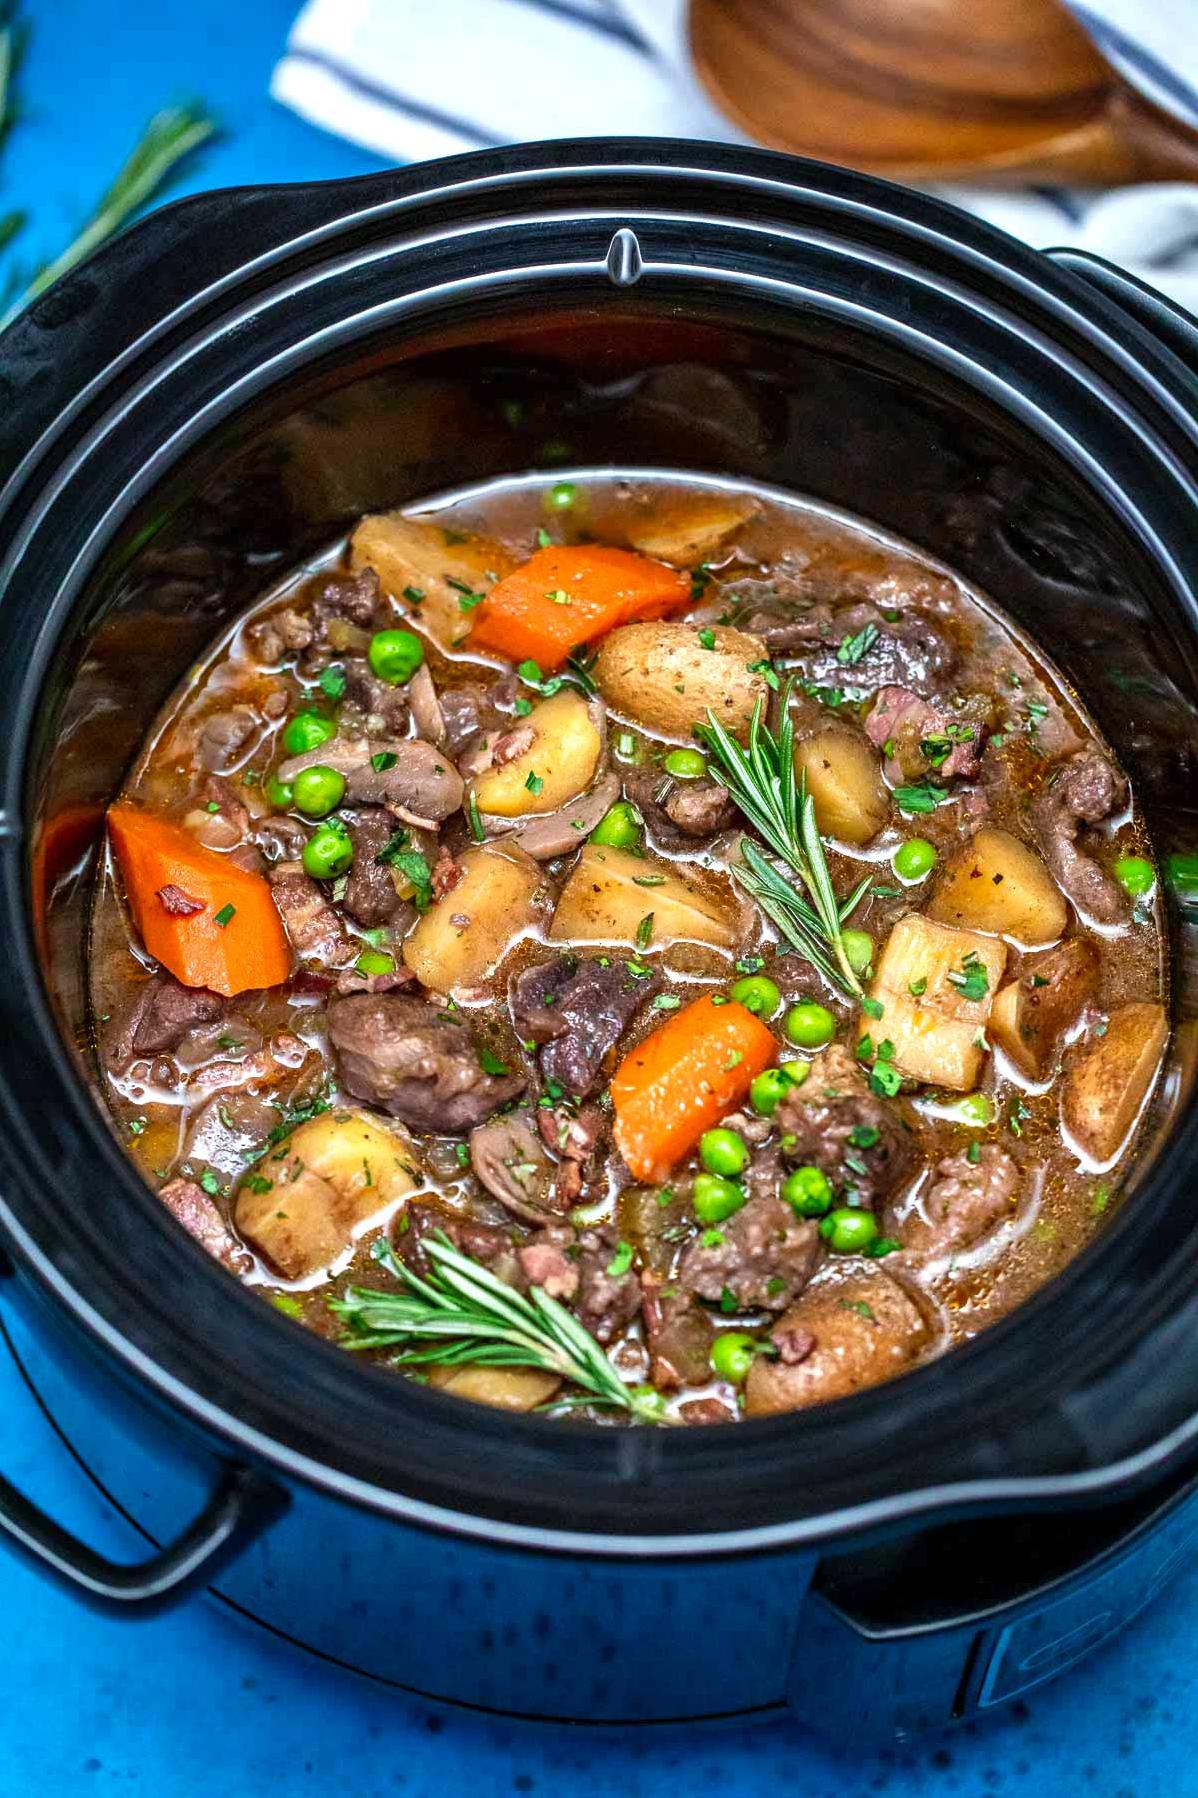  This stew may take time, but is always worth the wait.